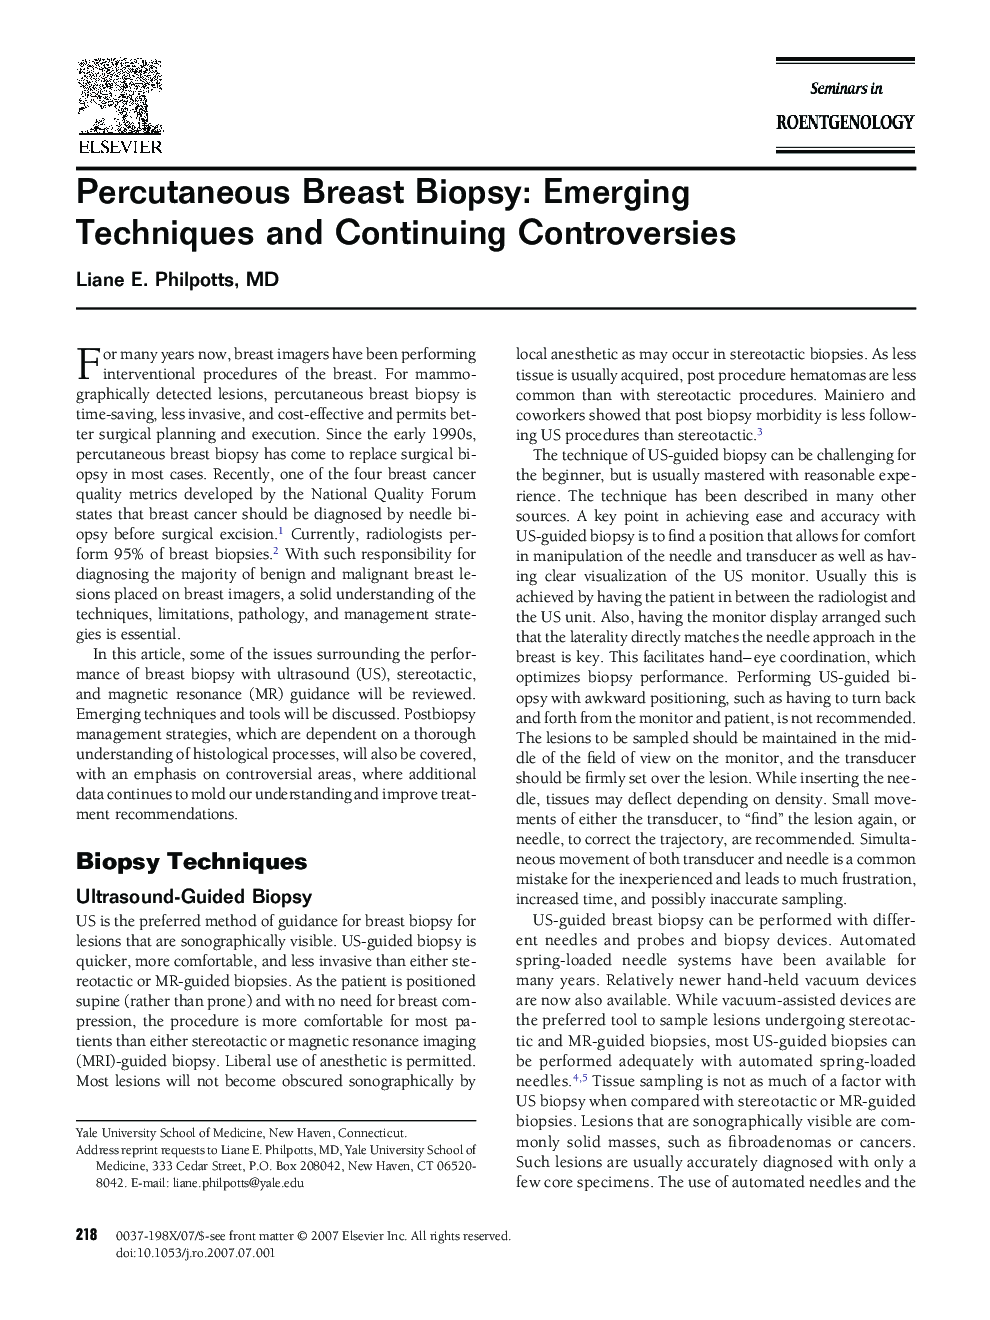 Percutaneous Breast Biopsy: Emerging Techniques and Continuing Controversies